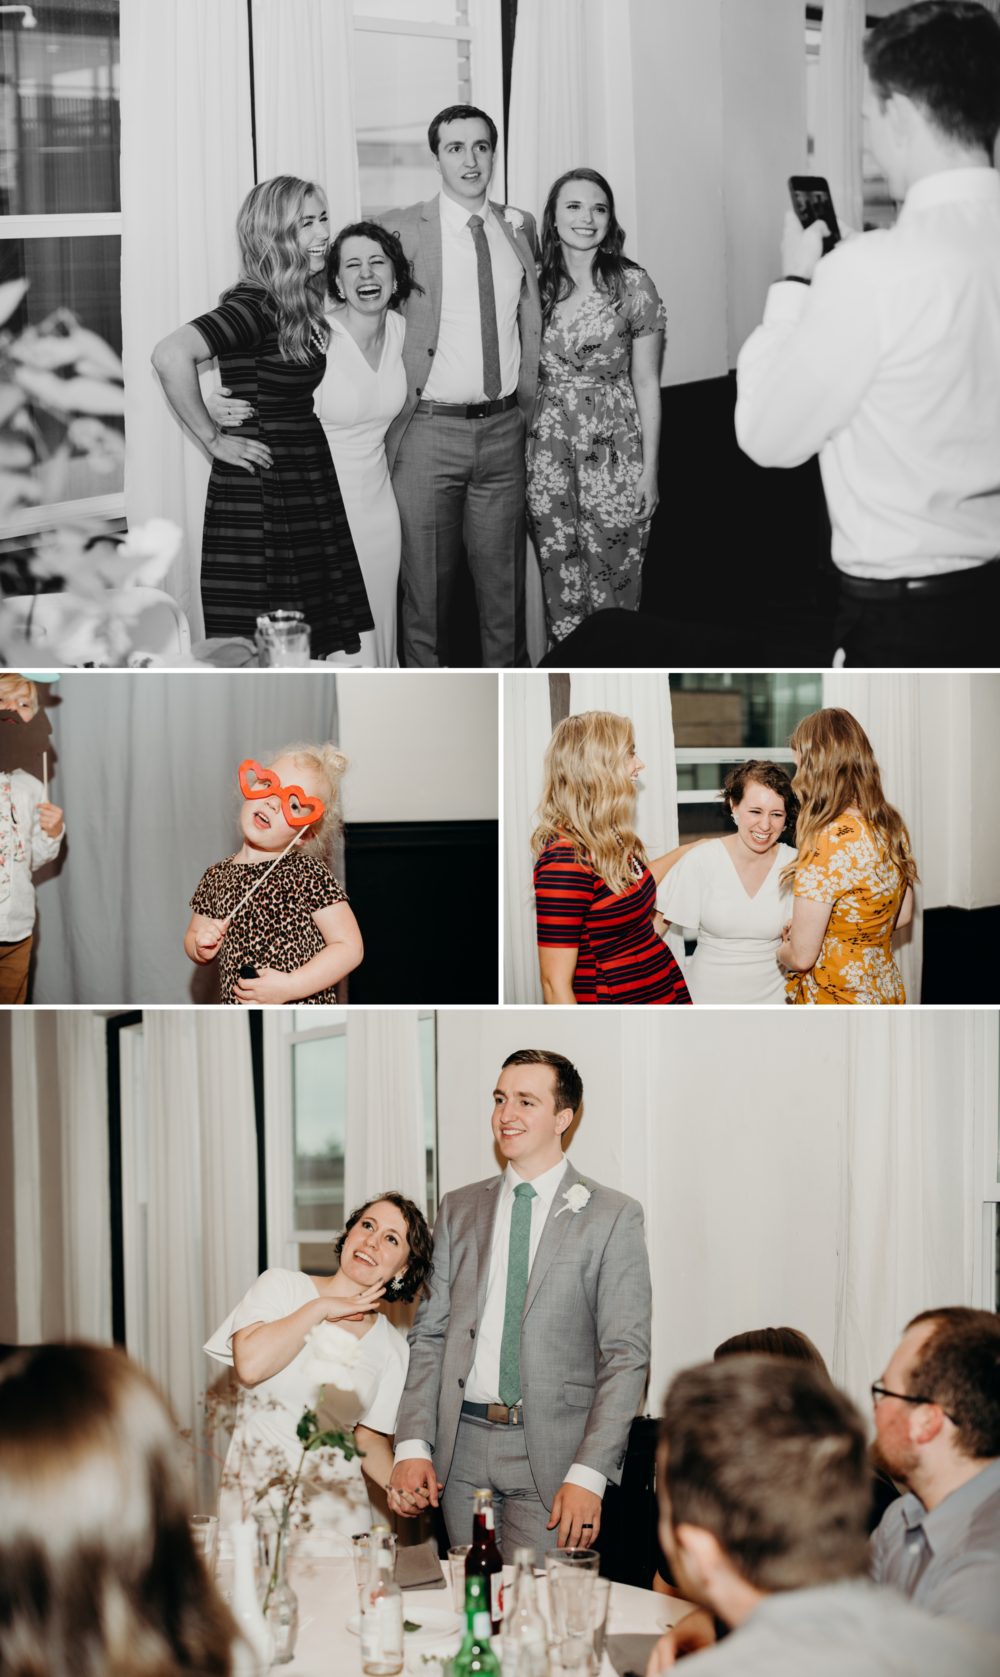 More candid photography inside the Baker Building by Portland wedding photographer Briana Morrison